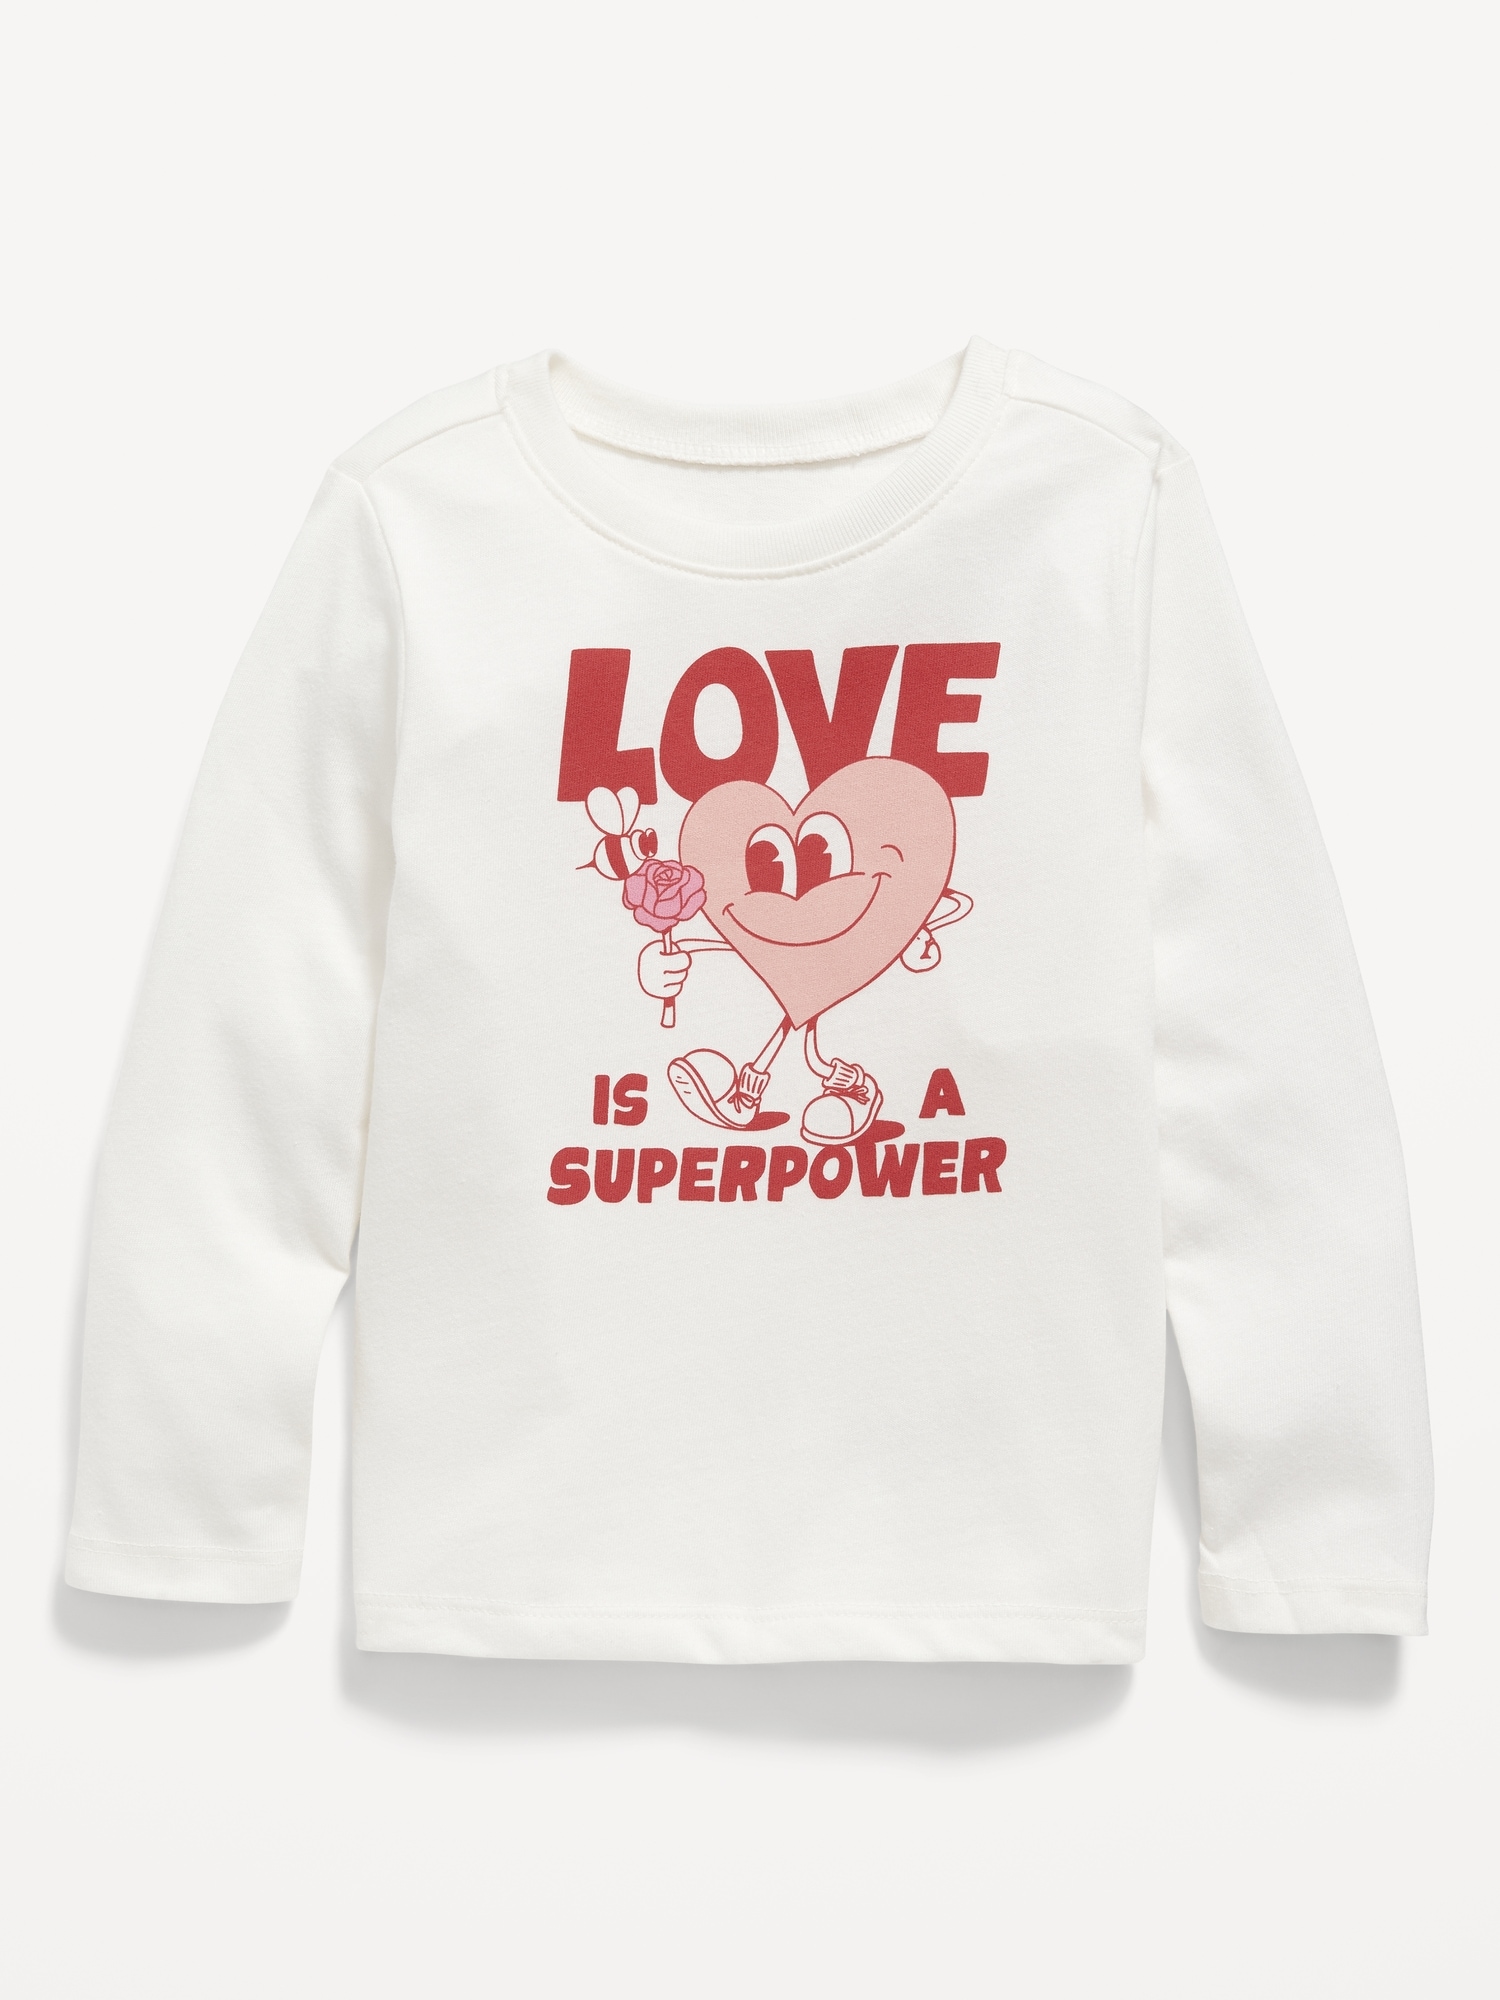 Long-Sleeve Valentine's Day Graphic T-Shirt for Toddler Girls